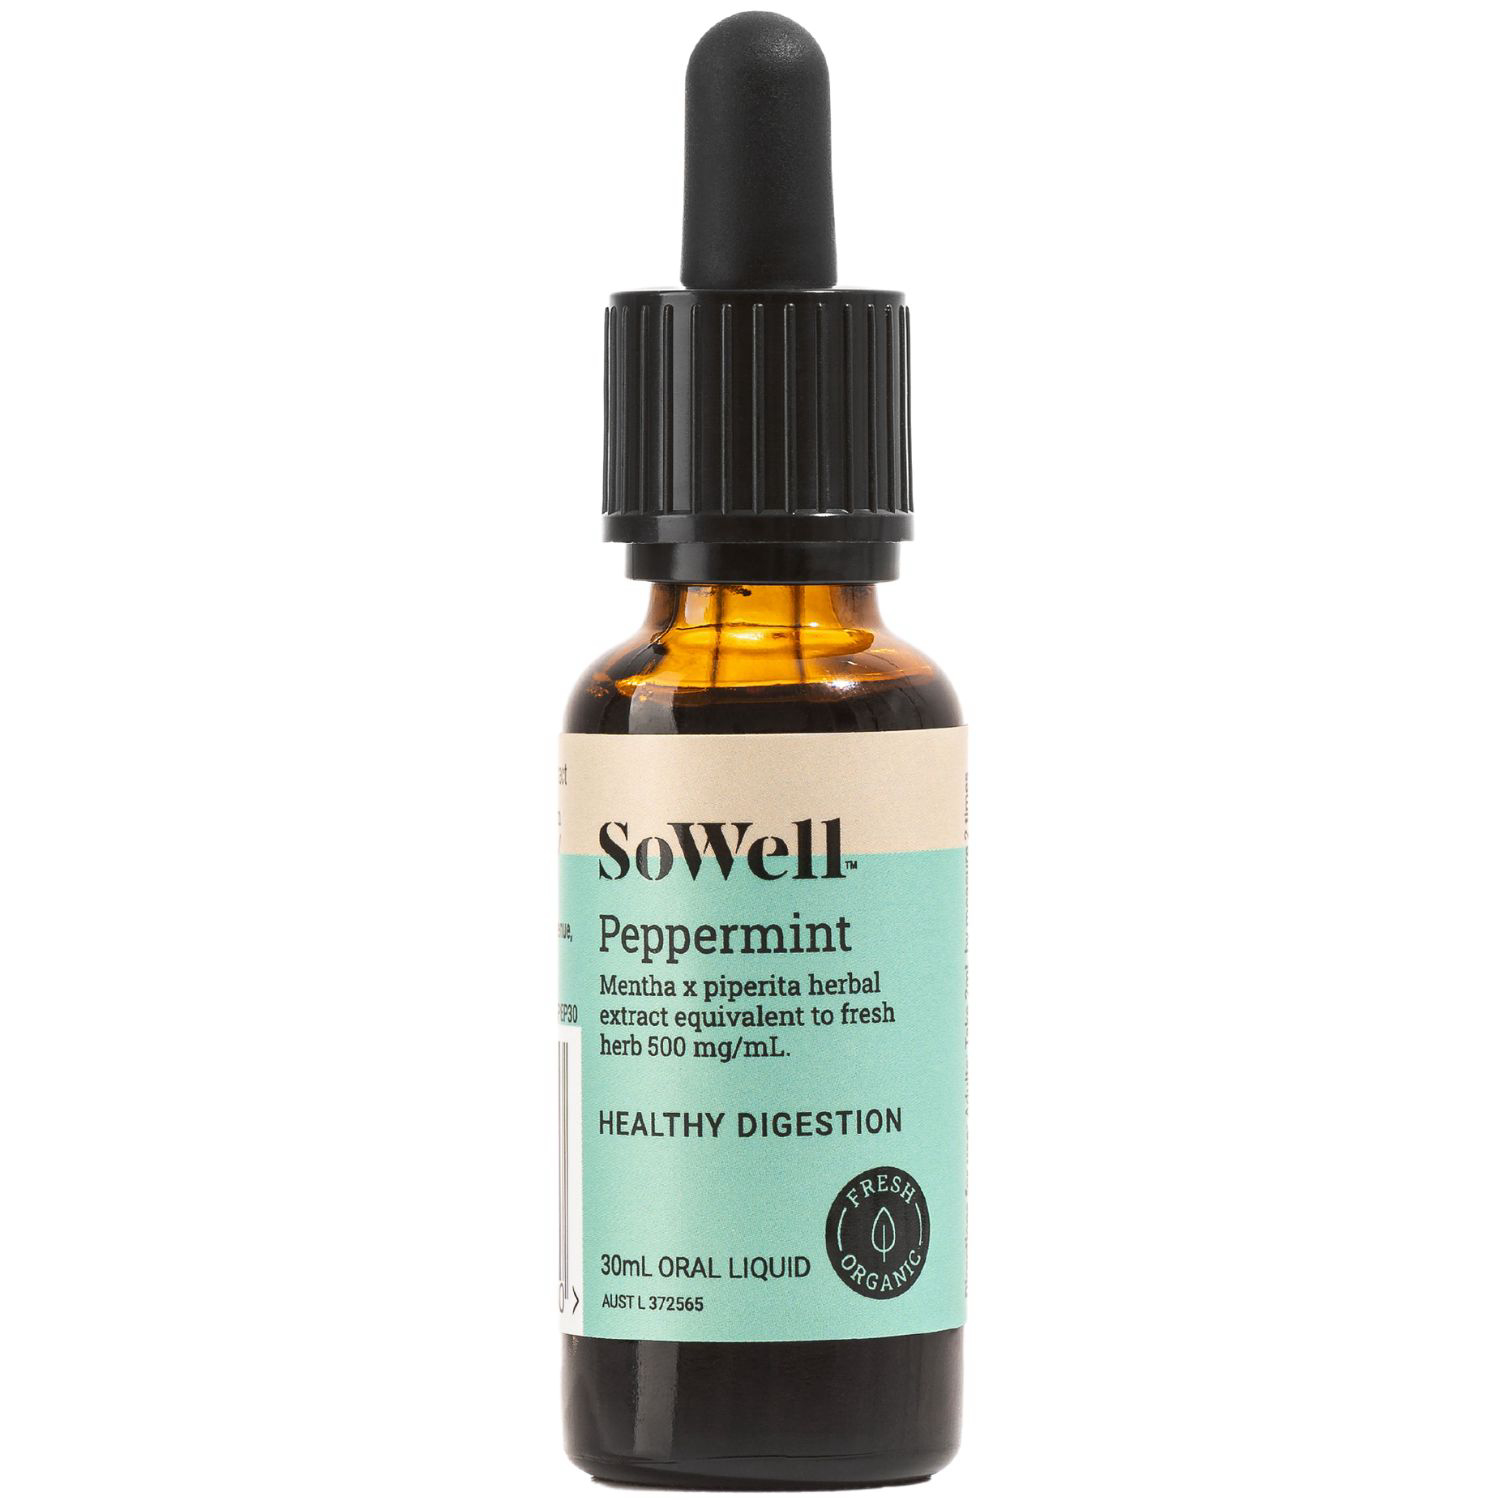 SoWell Peppermint Liquid Extract